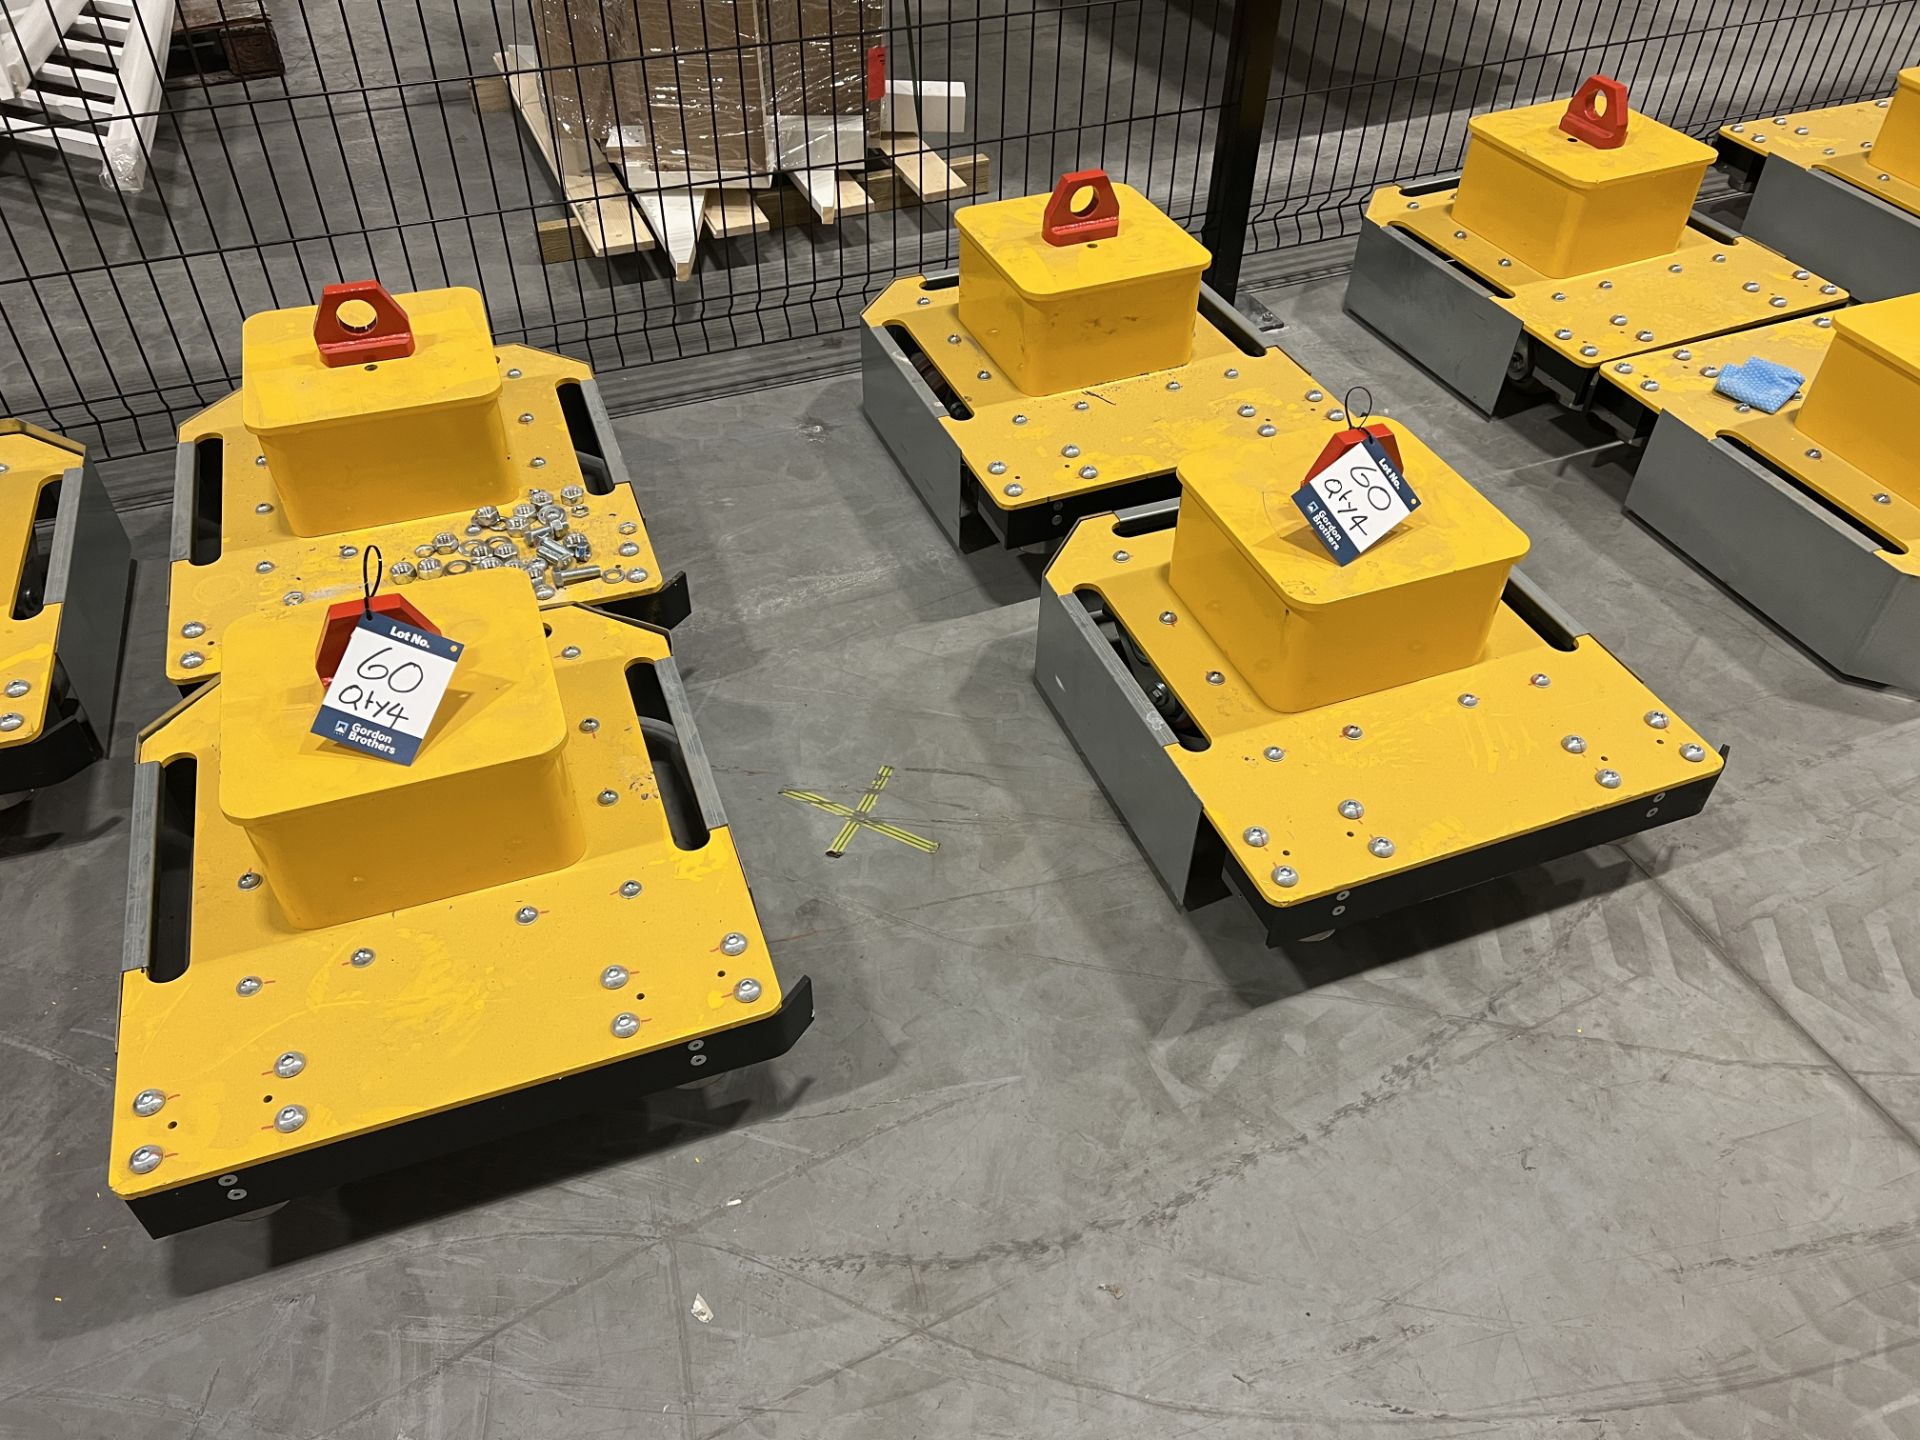 Heavy duty skates (2021) from lot 21 the Tracoinsa Systems UK conveying system this lot will